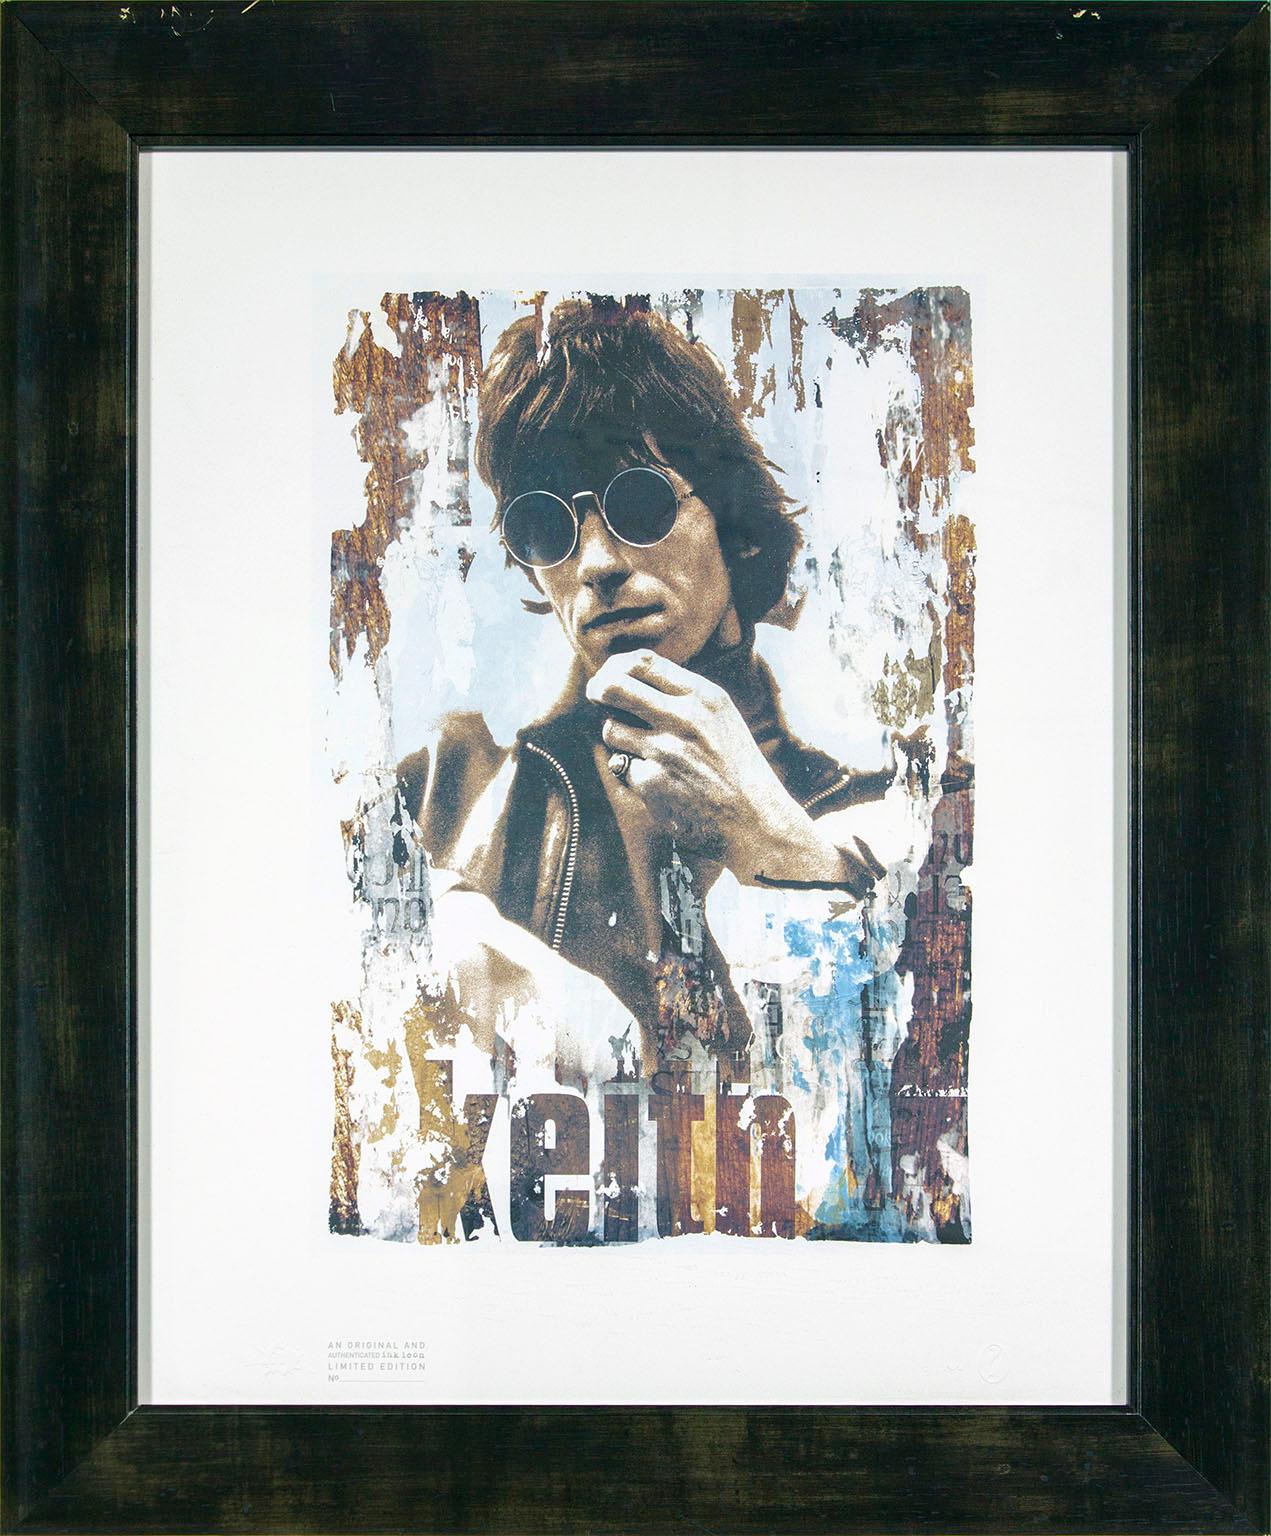 "Keith Richards" limited edition silkscreen print by artist Gered Mankowitz. Image size: 21 x 14 inches. Embossed with stamp on lower left and The Gered Mankowitz Archive M and ? stamp on lower right. "An Original and Authenticated ink icon Limited